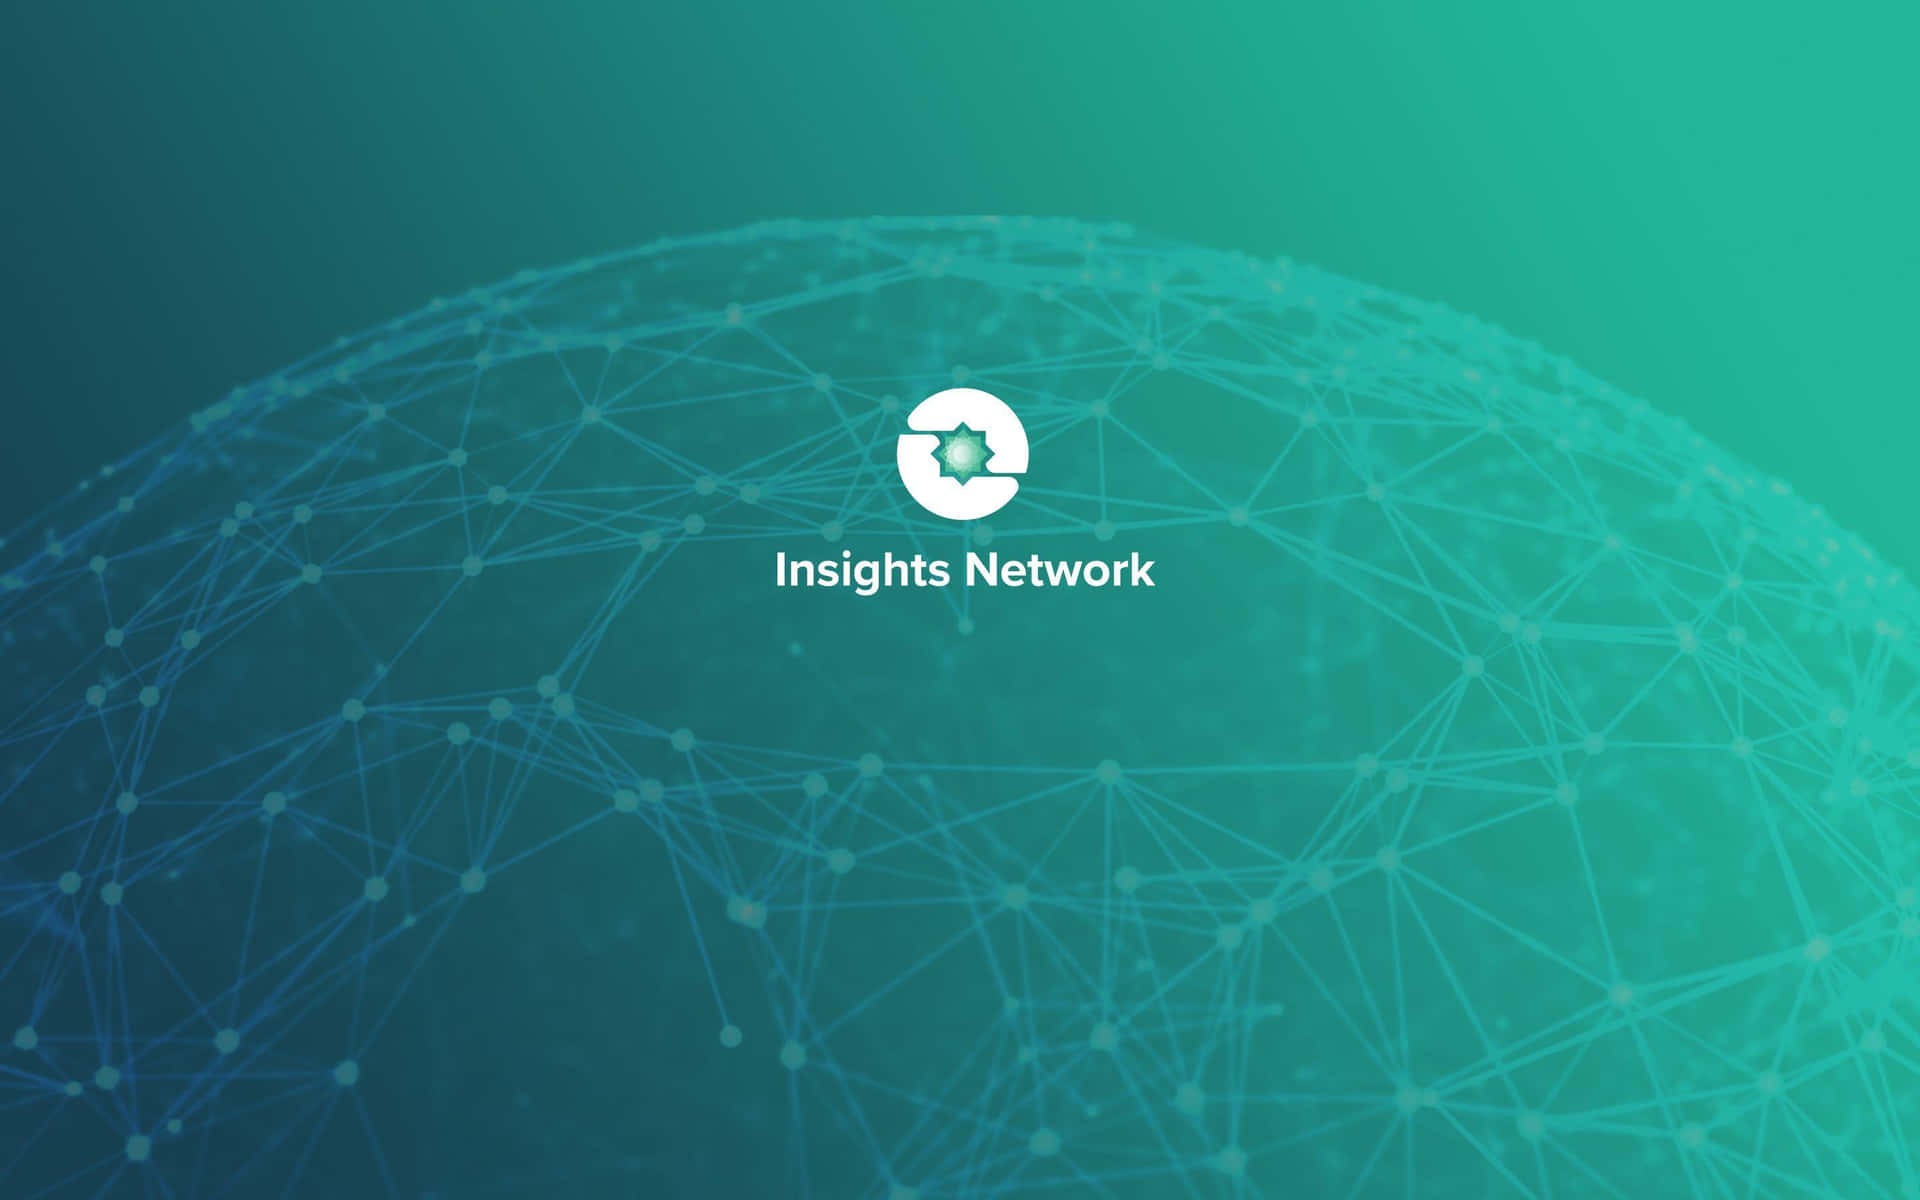 Insights Network Global Connectivity